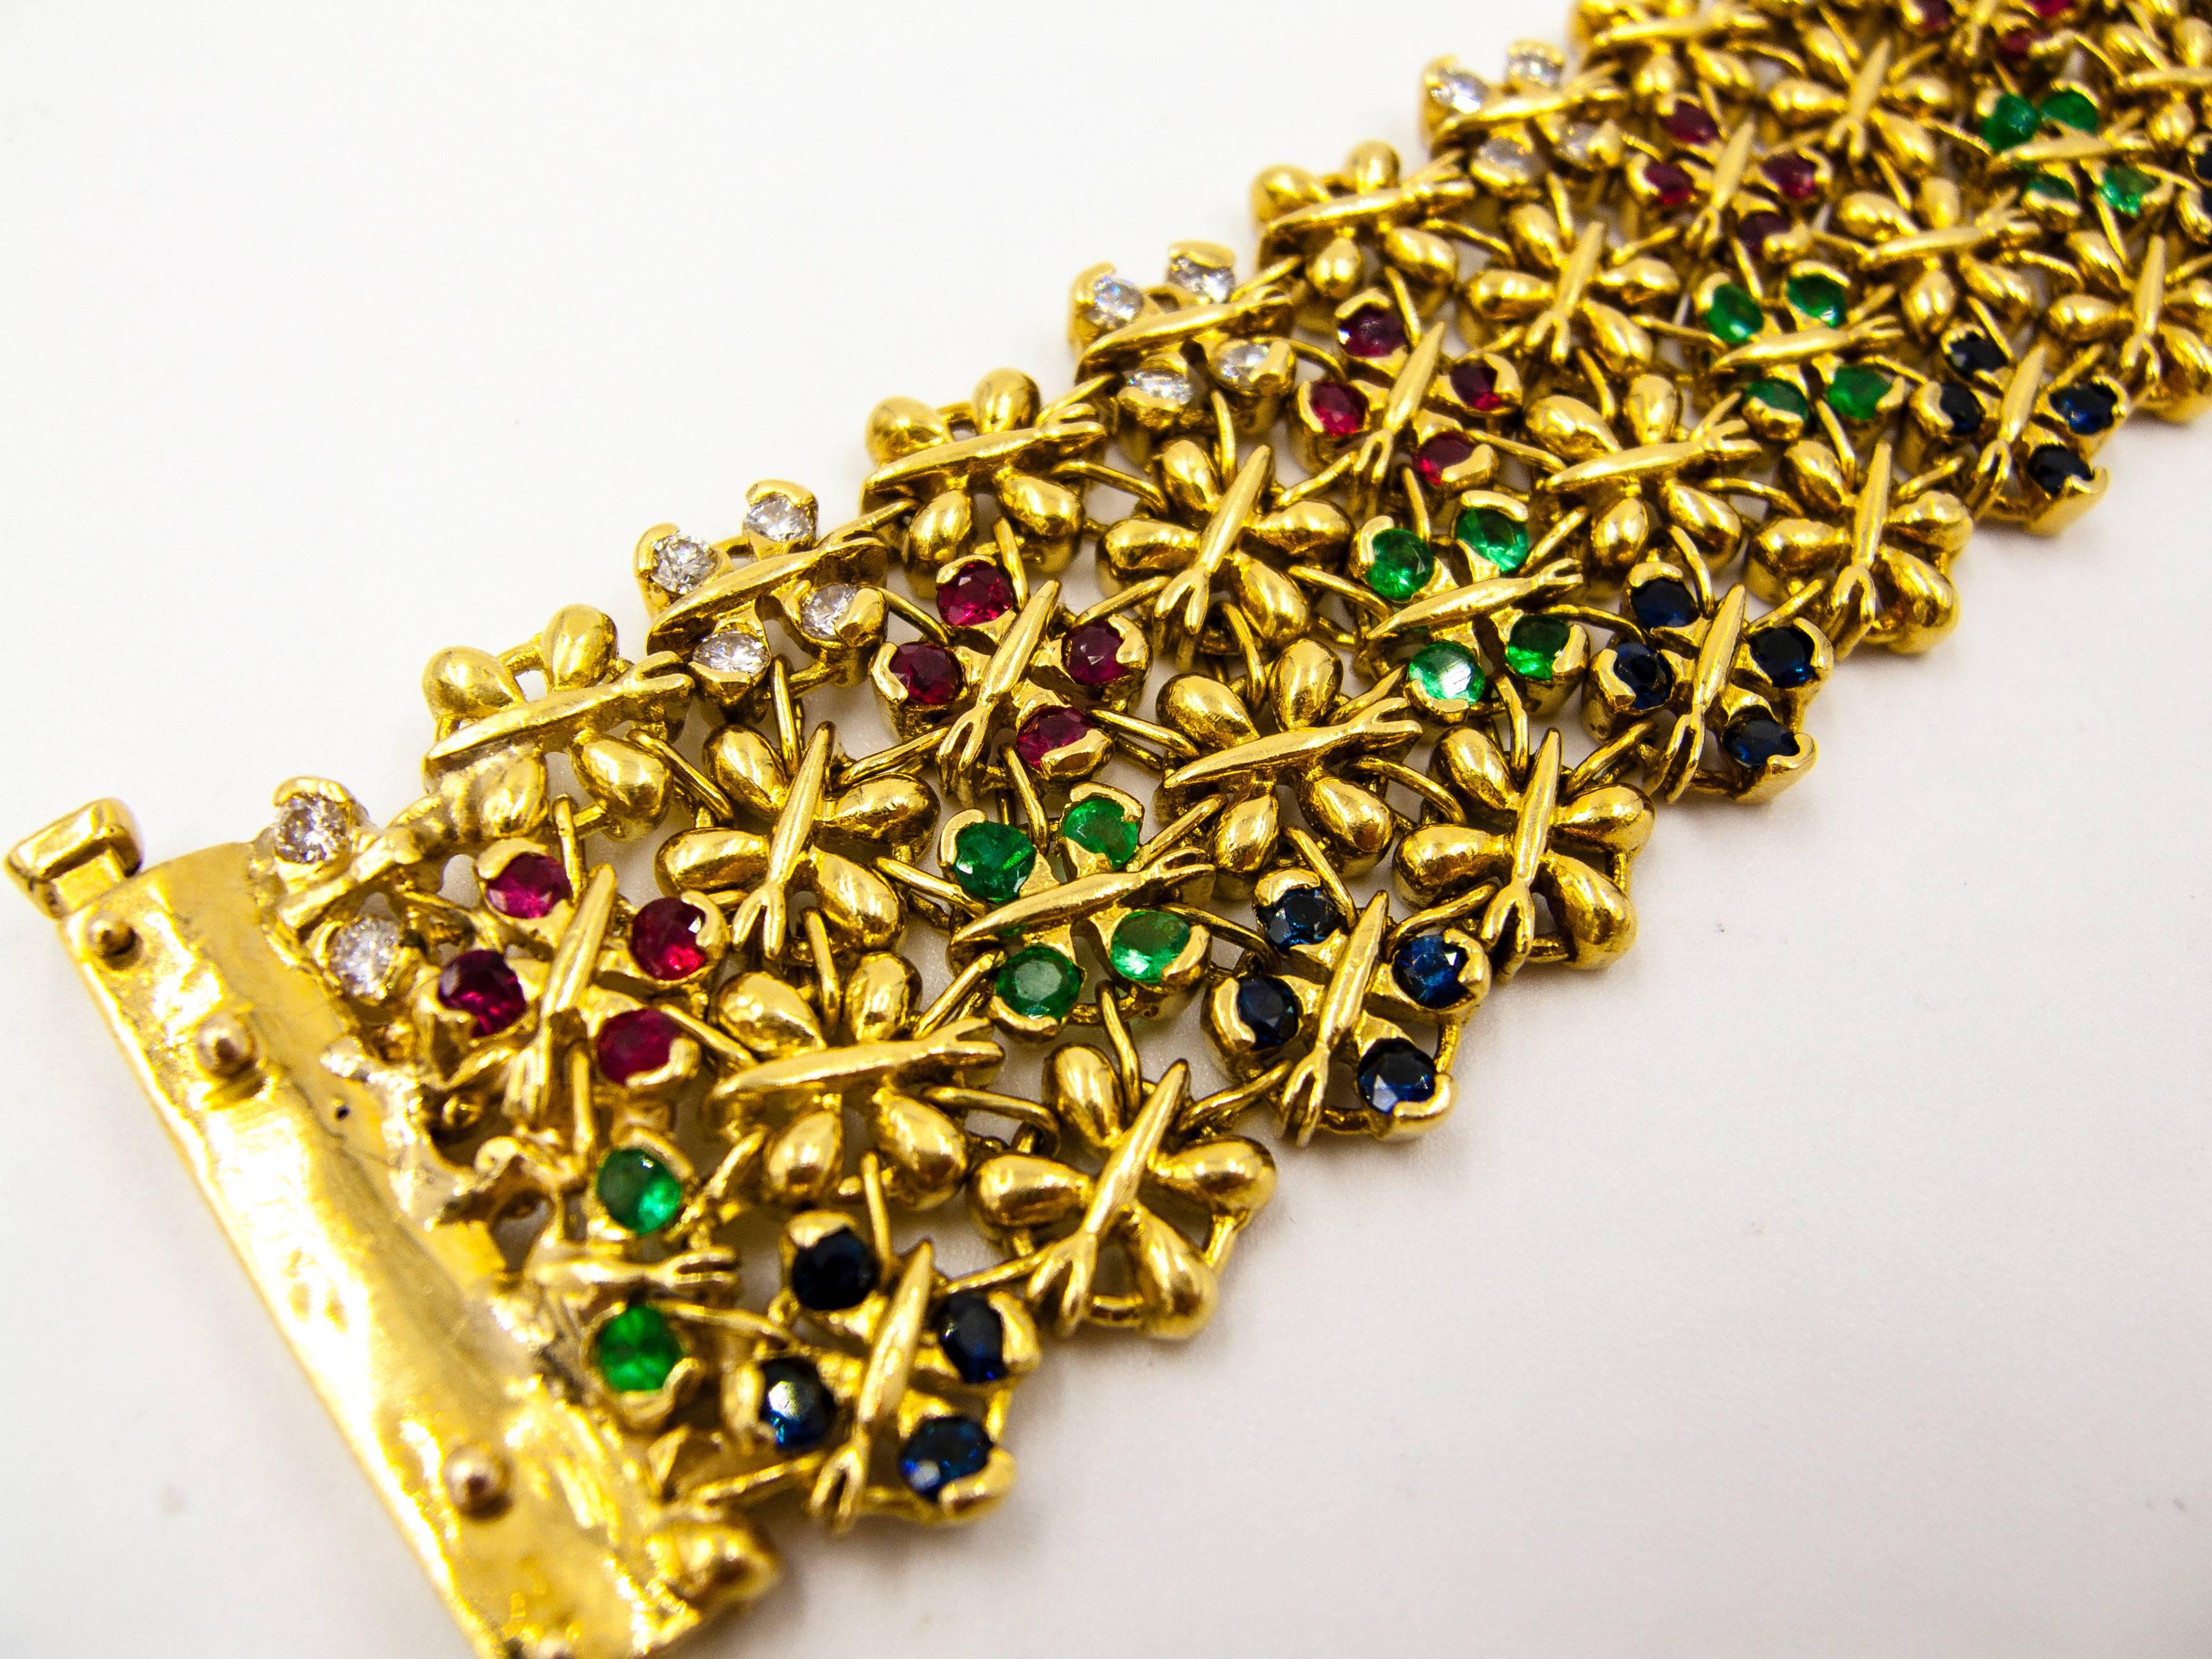   This bracelet has a wonderful, fabric-like quality as it's held in the hand or worn on the wrist.  The petite floral motifs, individually set with rubies, emeralds, sapphires, and diamonds, are arranged in color-organized rows, and the stones are